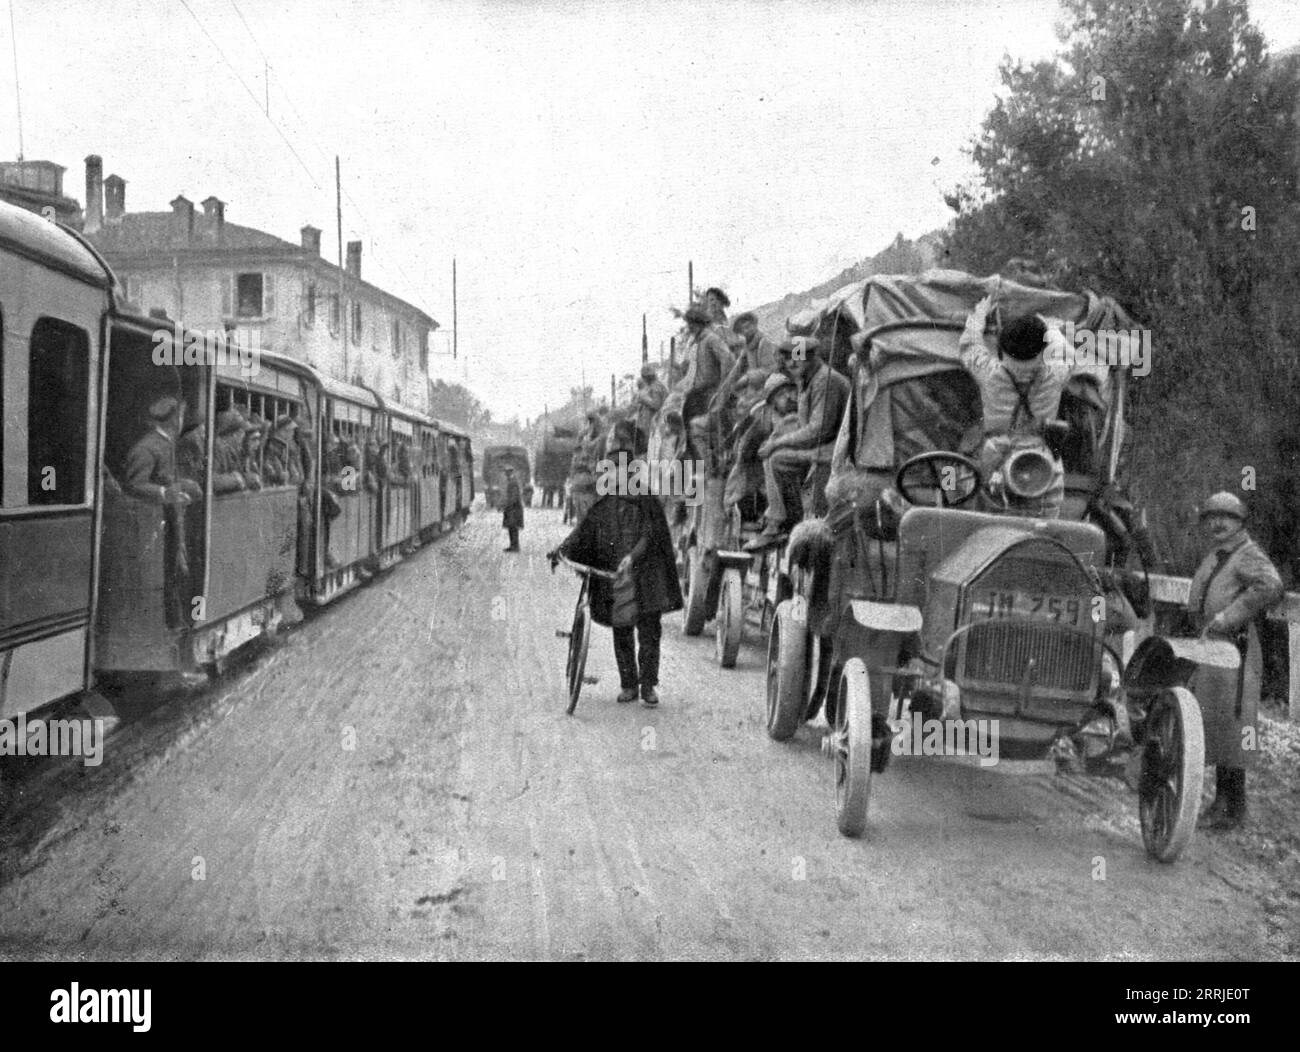 'French Troops in Italy; Two convoys on the road from Brescia to Verona: on the left, an electric train loaded with Italian troops; on the right, road-trucks transporting French troops', 1917. From &quot;L'Album de la Guerre 1914-1919, Volume 2&quot; [L'Illustration, Paris, 1924]. Stock Photo